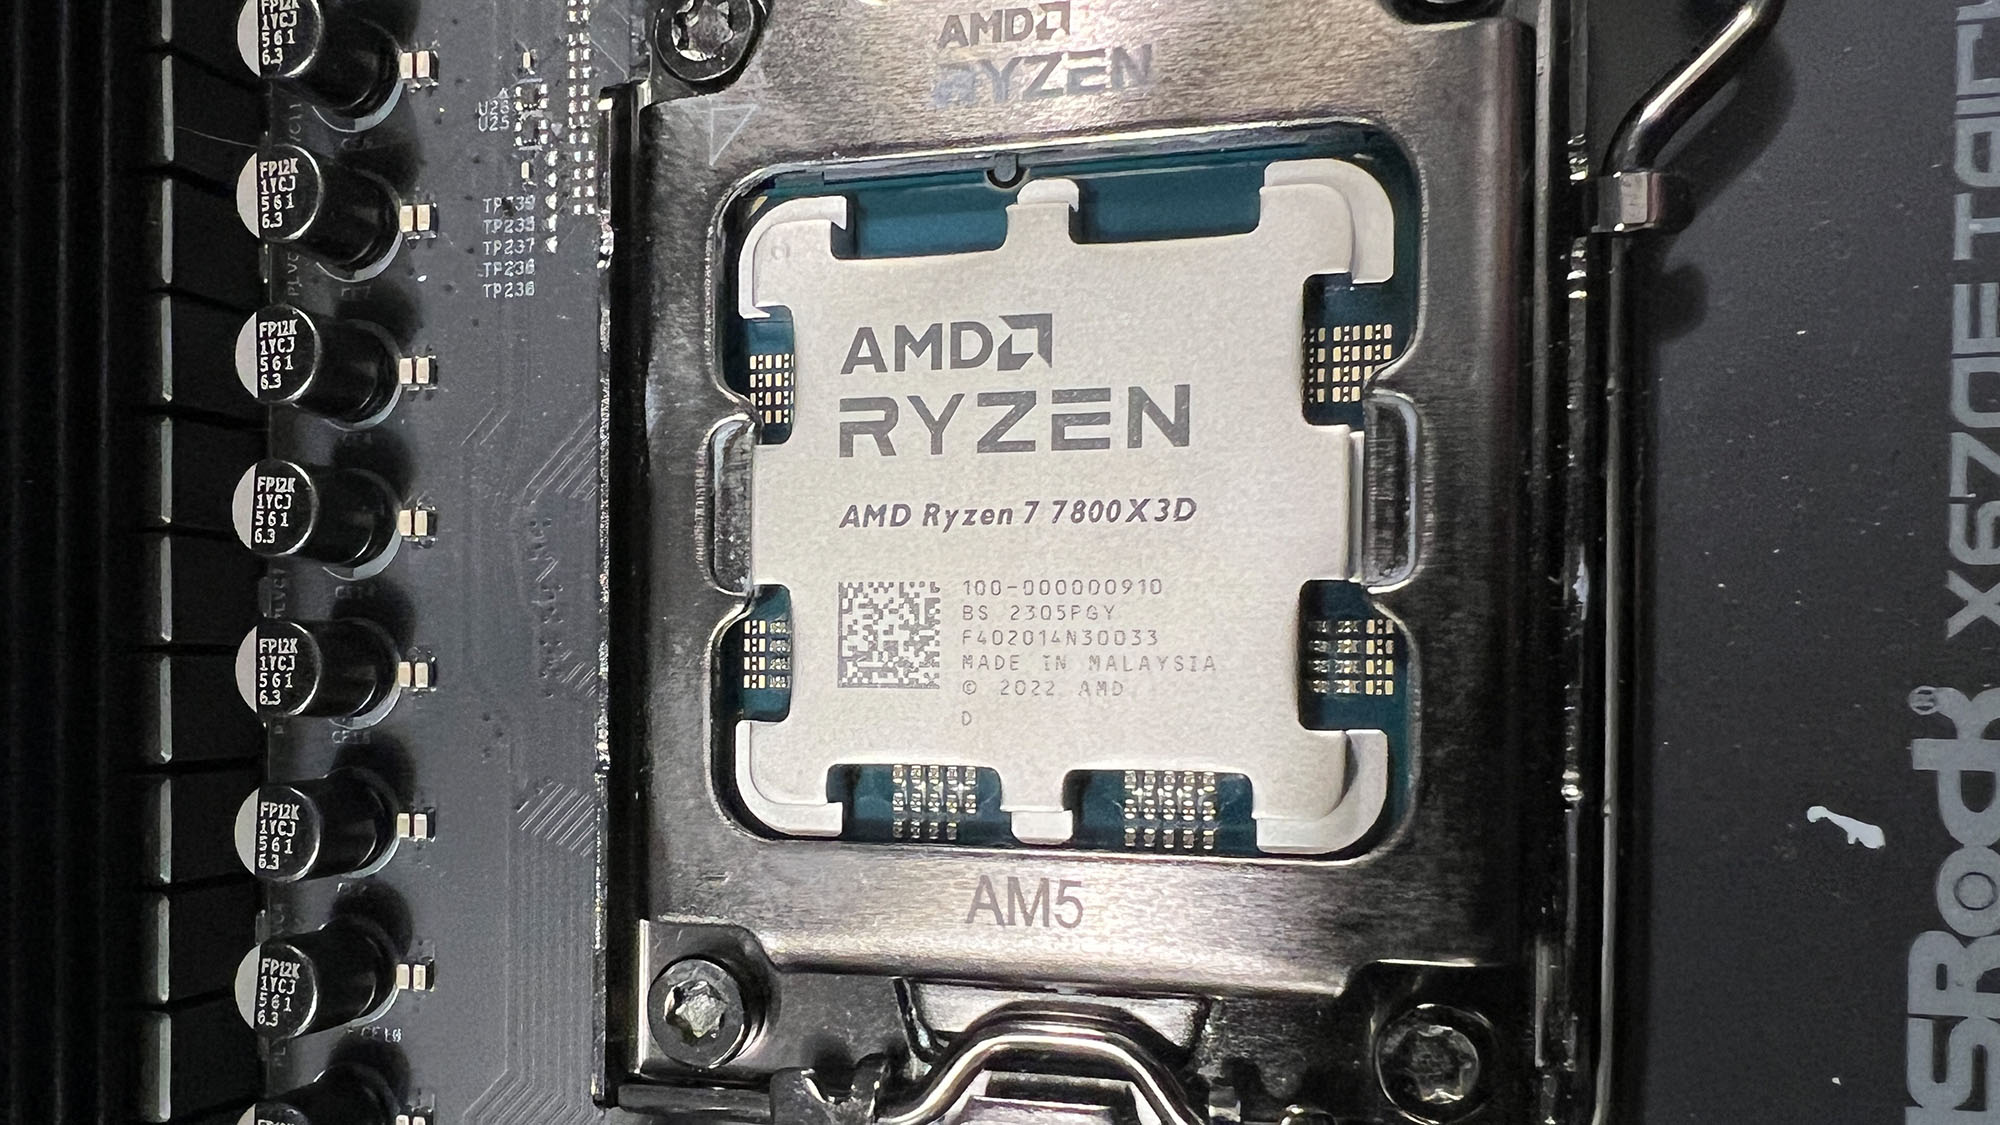 An AMD Ryzen 7 7800X3D slotted into a motherboard